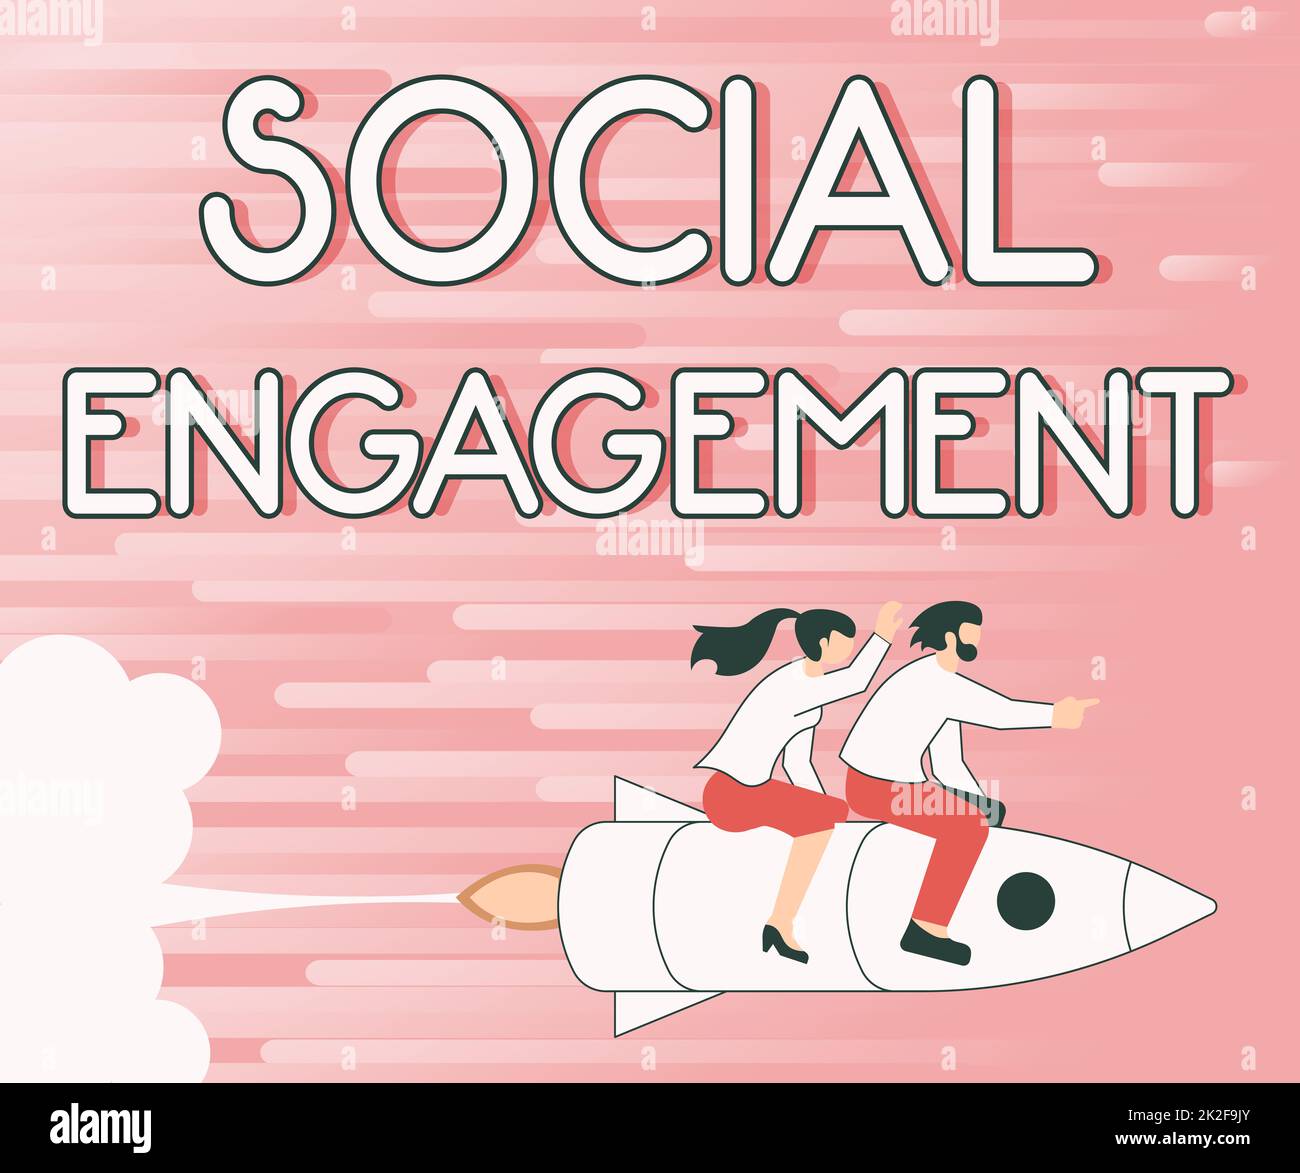 Conceptual caption Social Engagement. Internet Concept Degree of engagement in an online community or society Illustration Of Happy Partners Riding On Rocket Ship Exploring World. Stock Photo